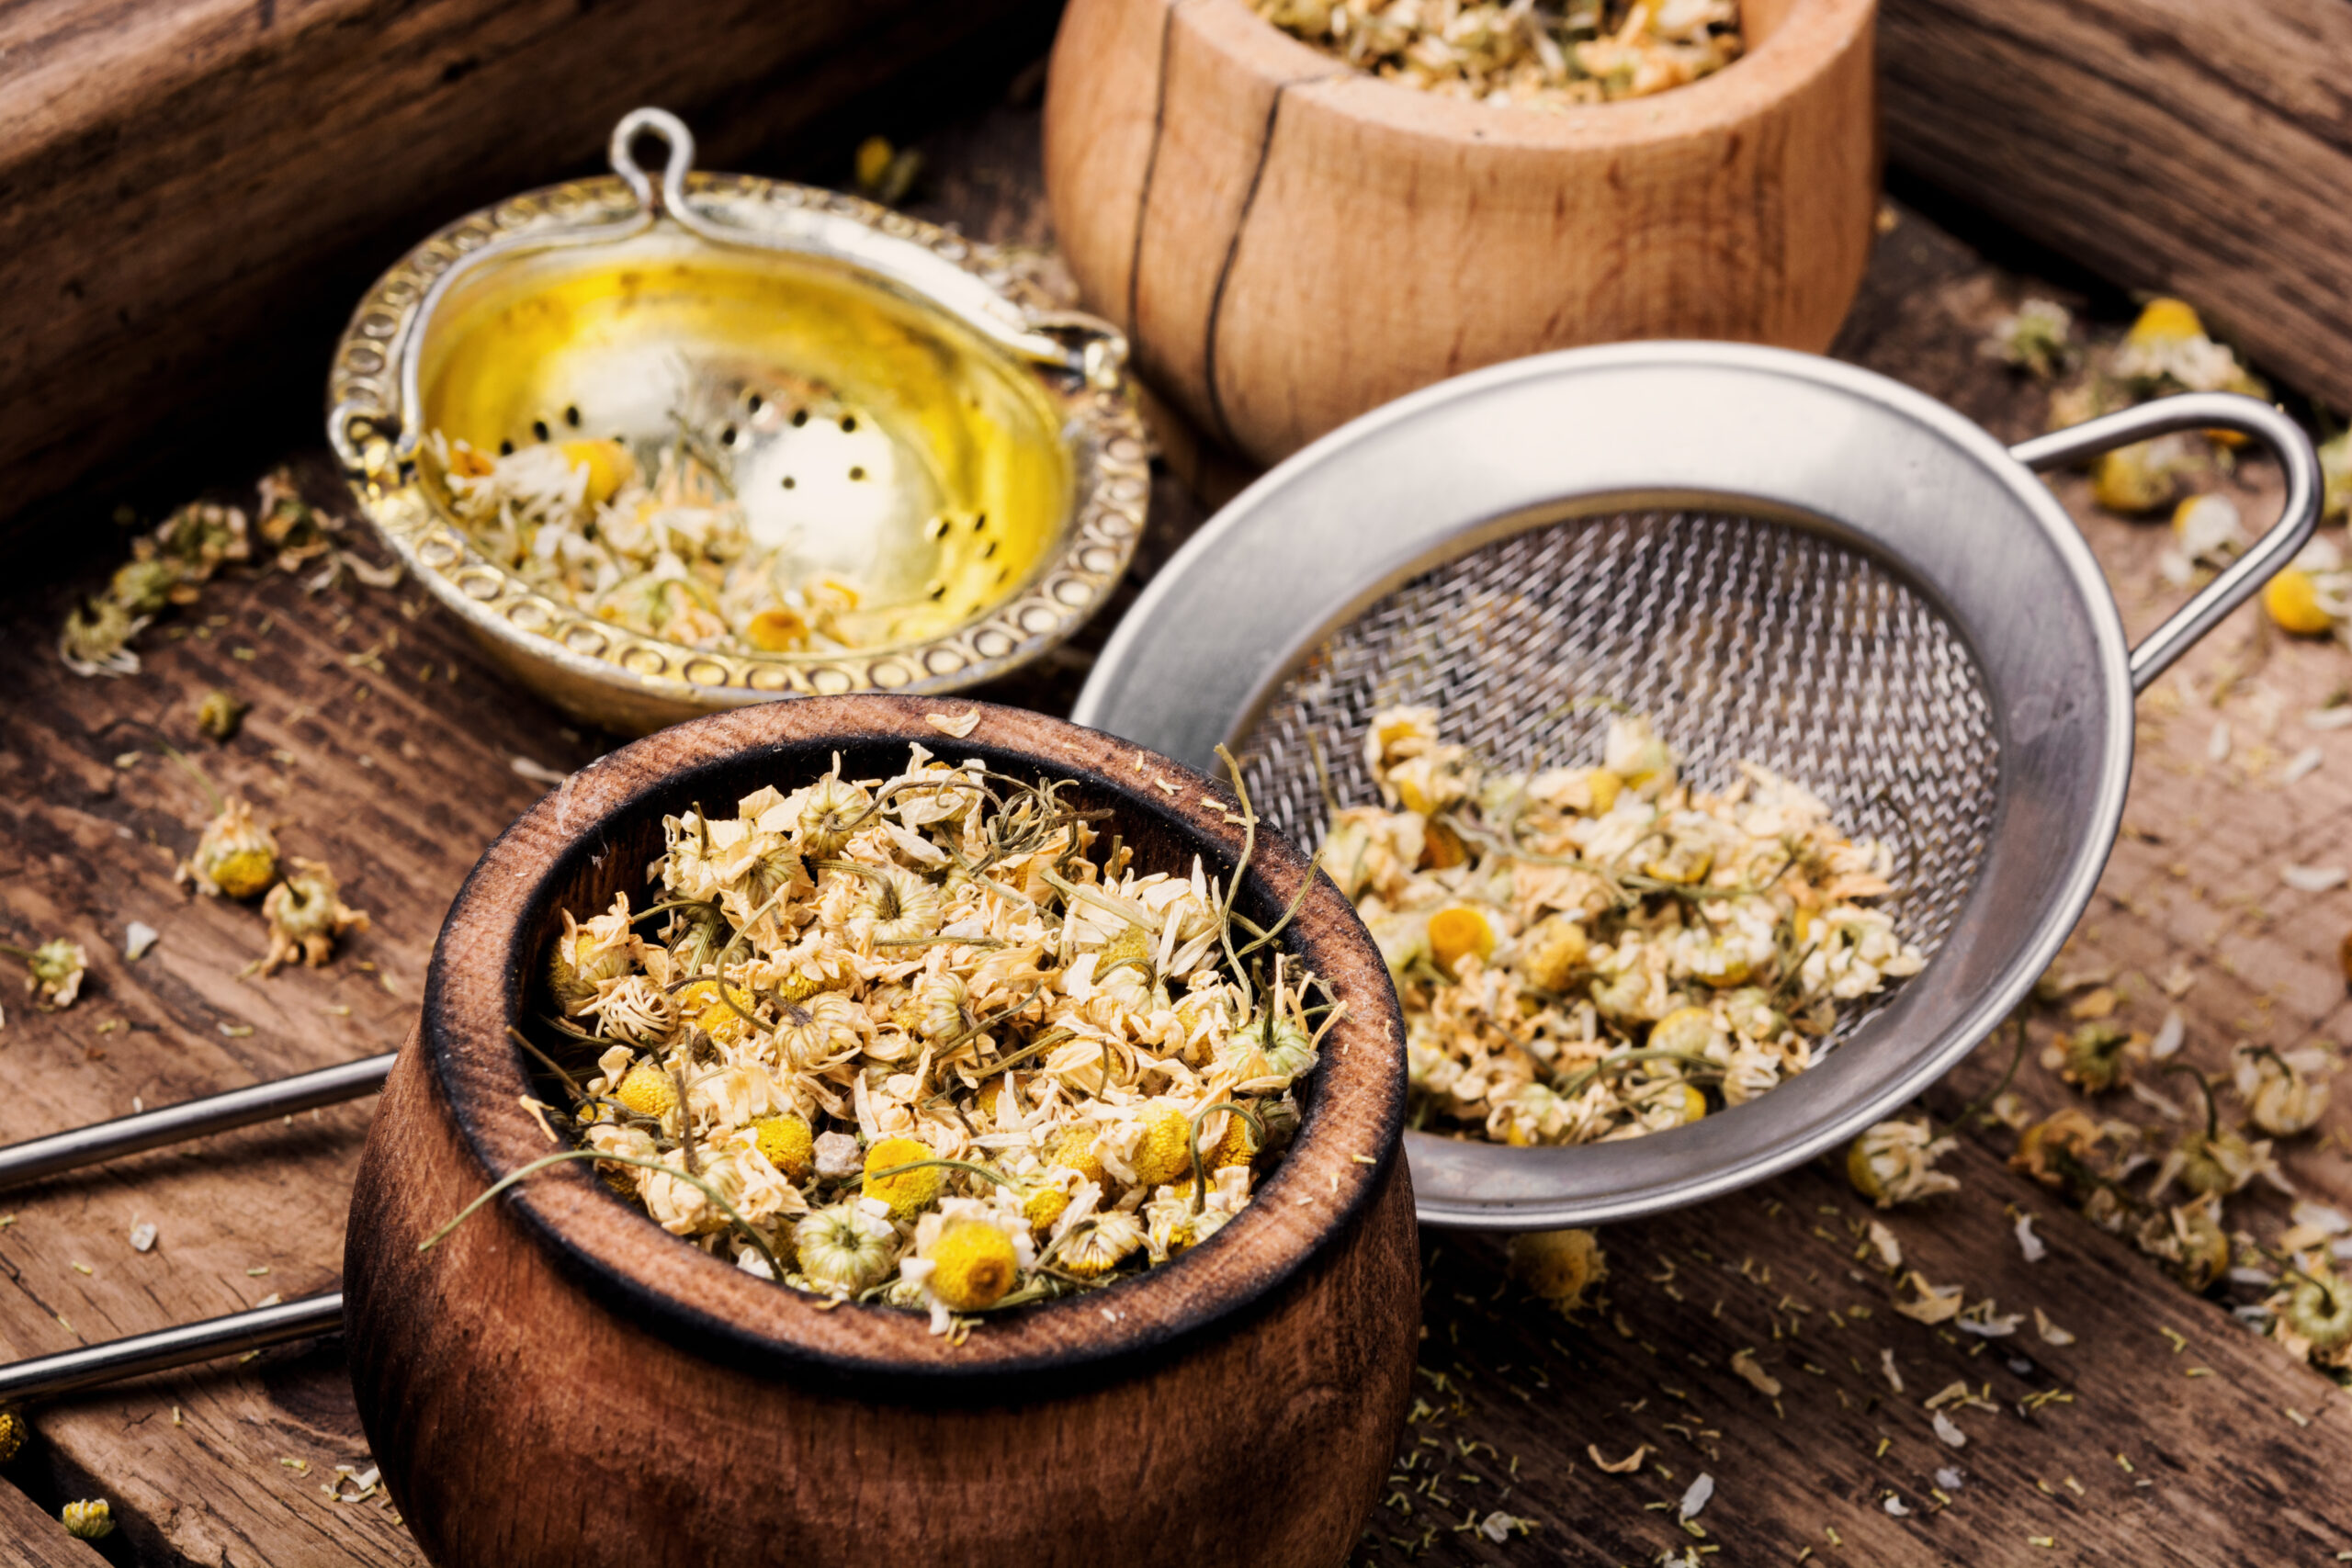 Dried chamomile flowers on wooden table.Alternative medicine.Bowls of dry medicinal herbs